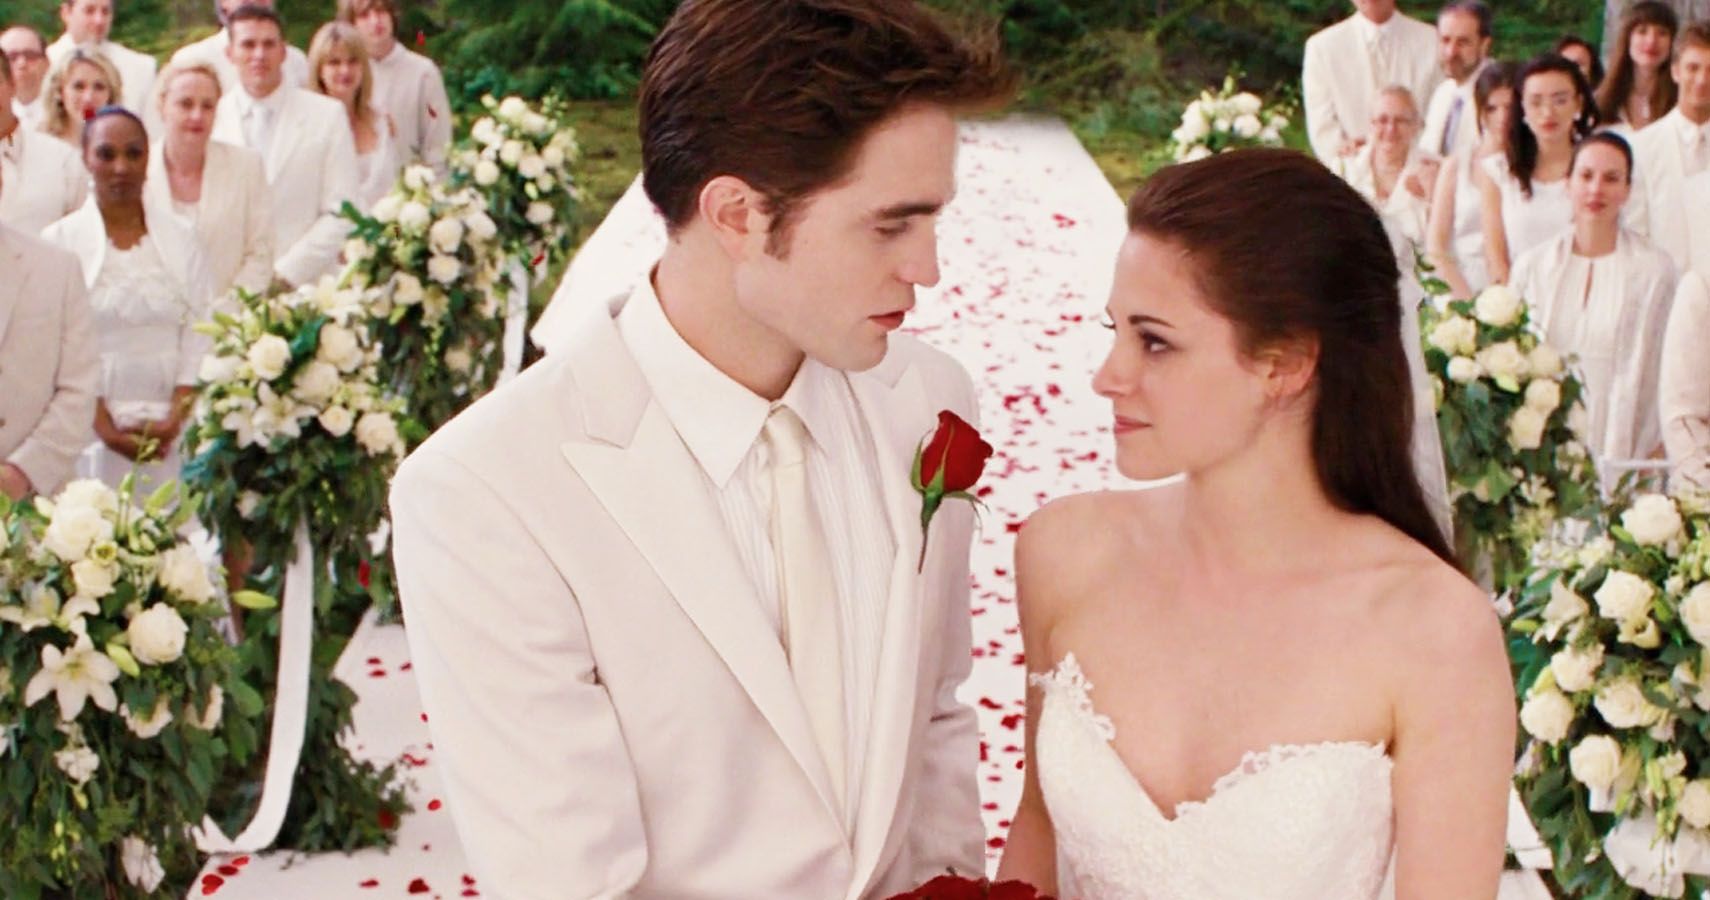 Twilight: 10 Hidden Details About Bella's Costume You Never Noticed